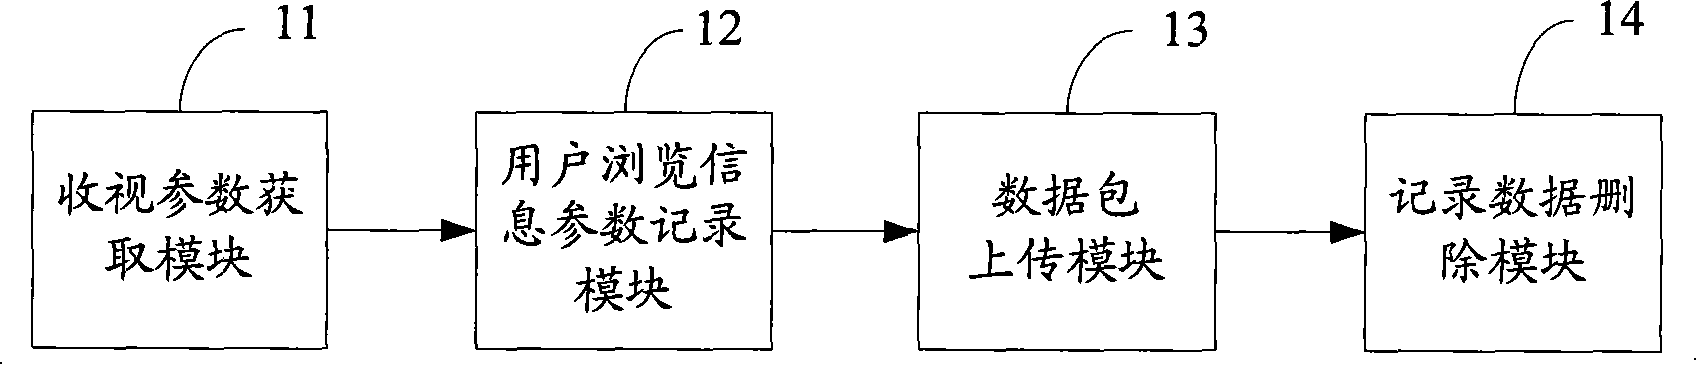 Message recording method of digital TV set-top box and accepting vision statistics service system